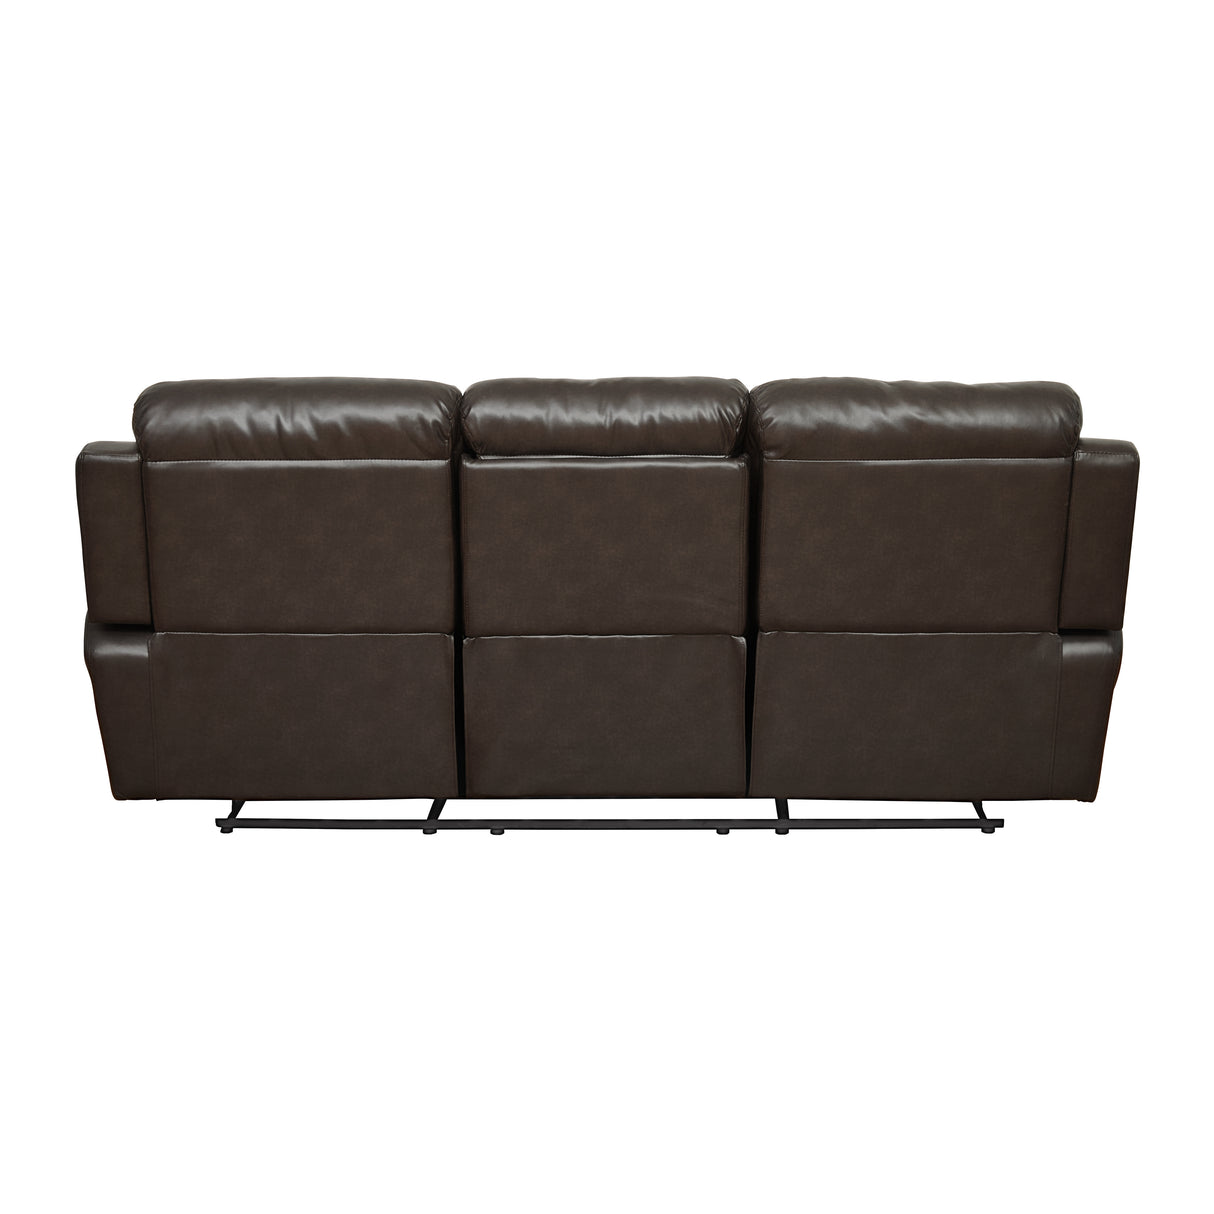 Marille Brown Double Reclining Sofa With Center Drop-Down Cup Holders